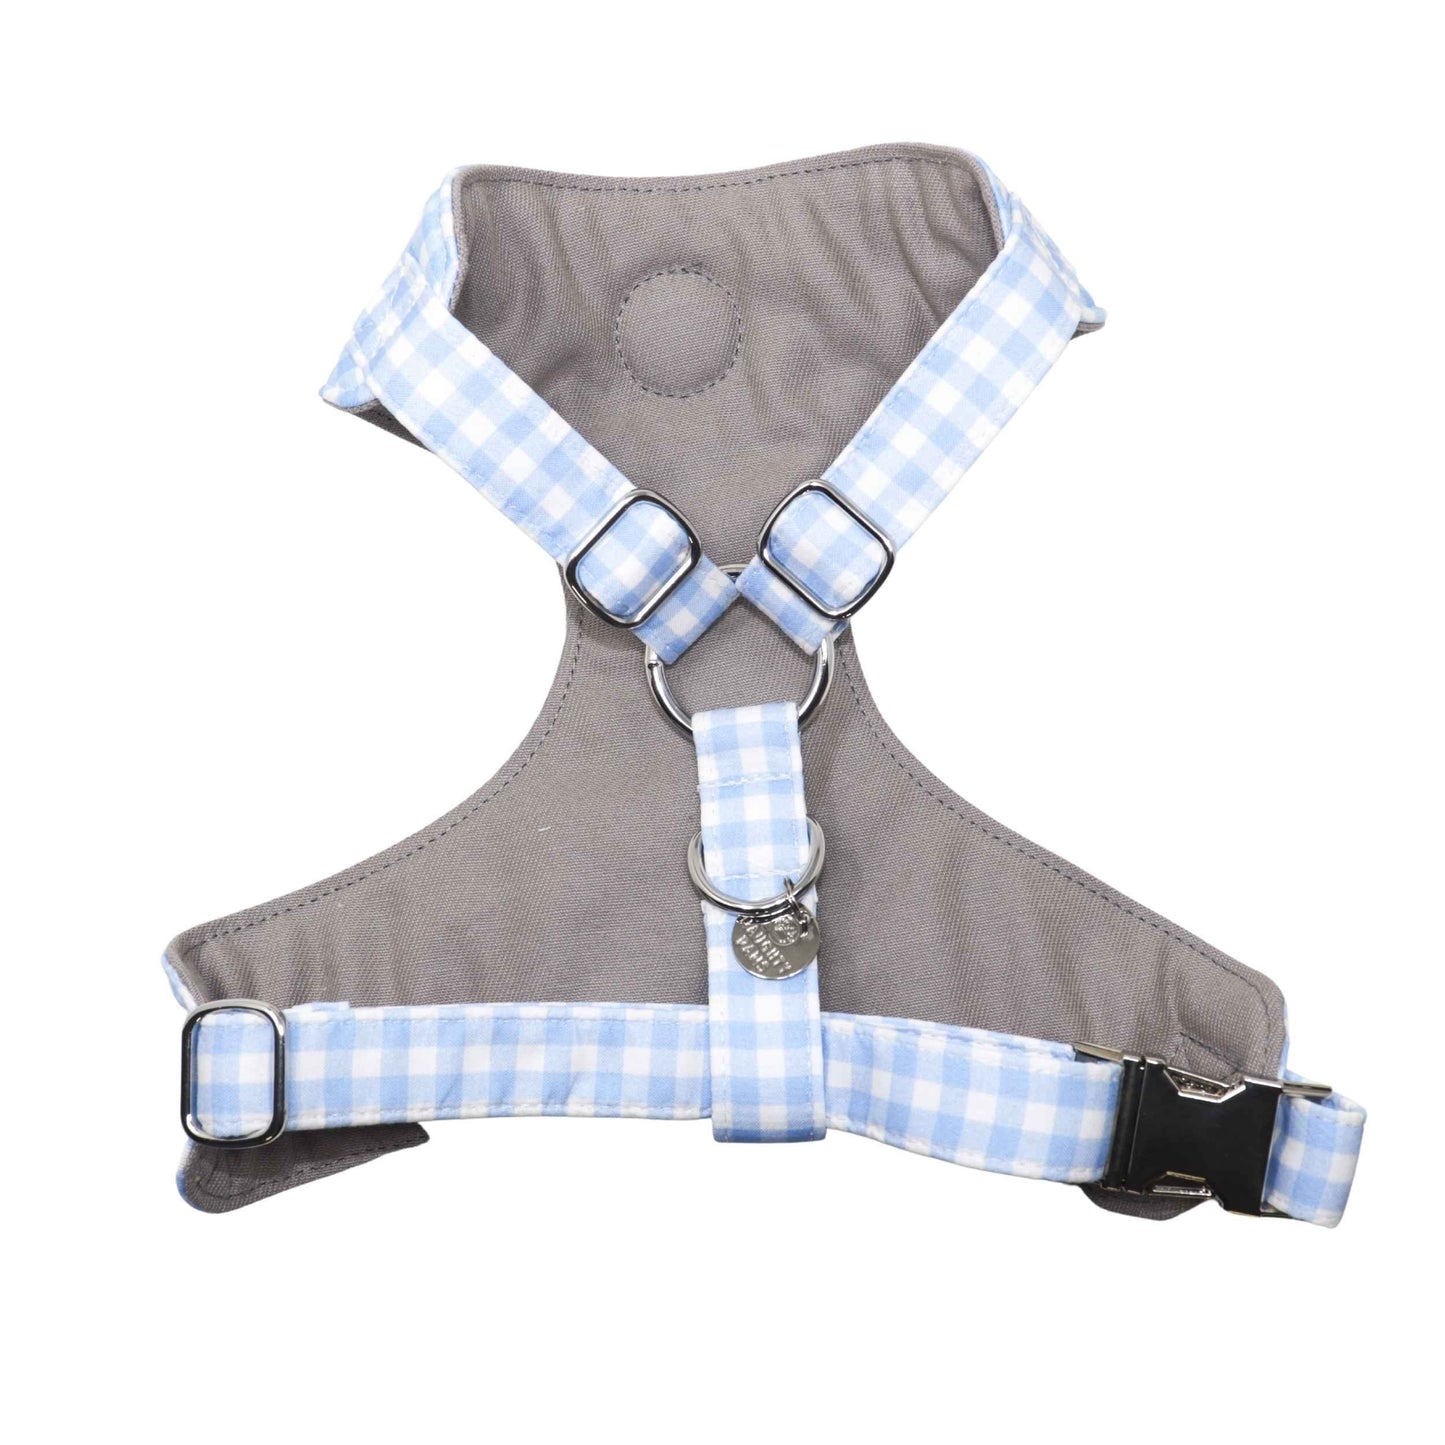 "My Blueberry Jam" Chest Harness